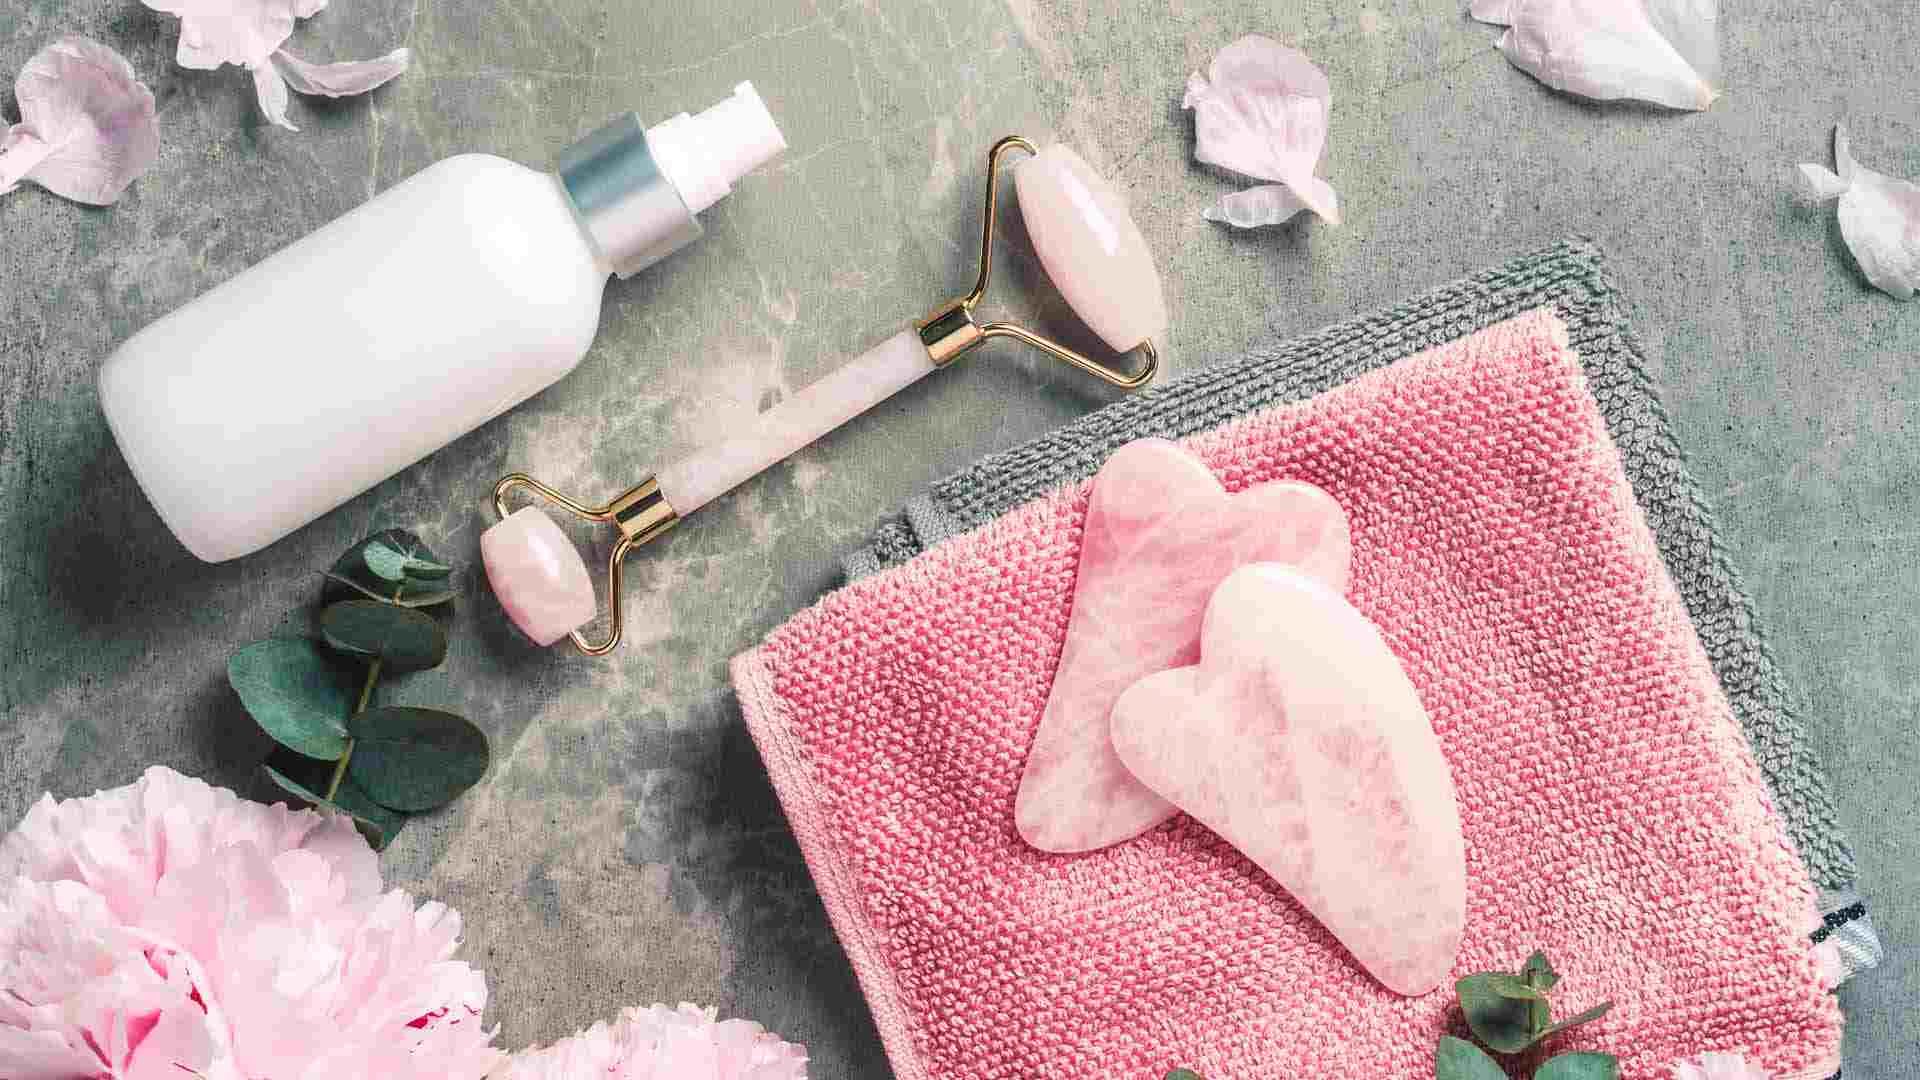 Loreal Paris Article 7 Skin Care Tools That Deserve a Spot in Your Routine D 2